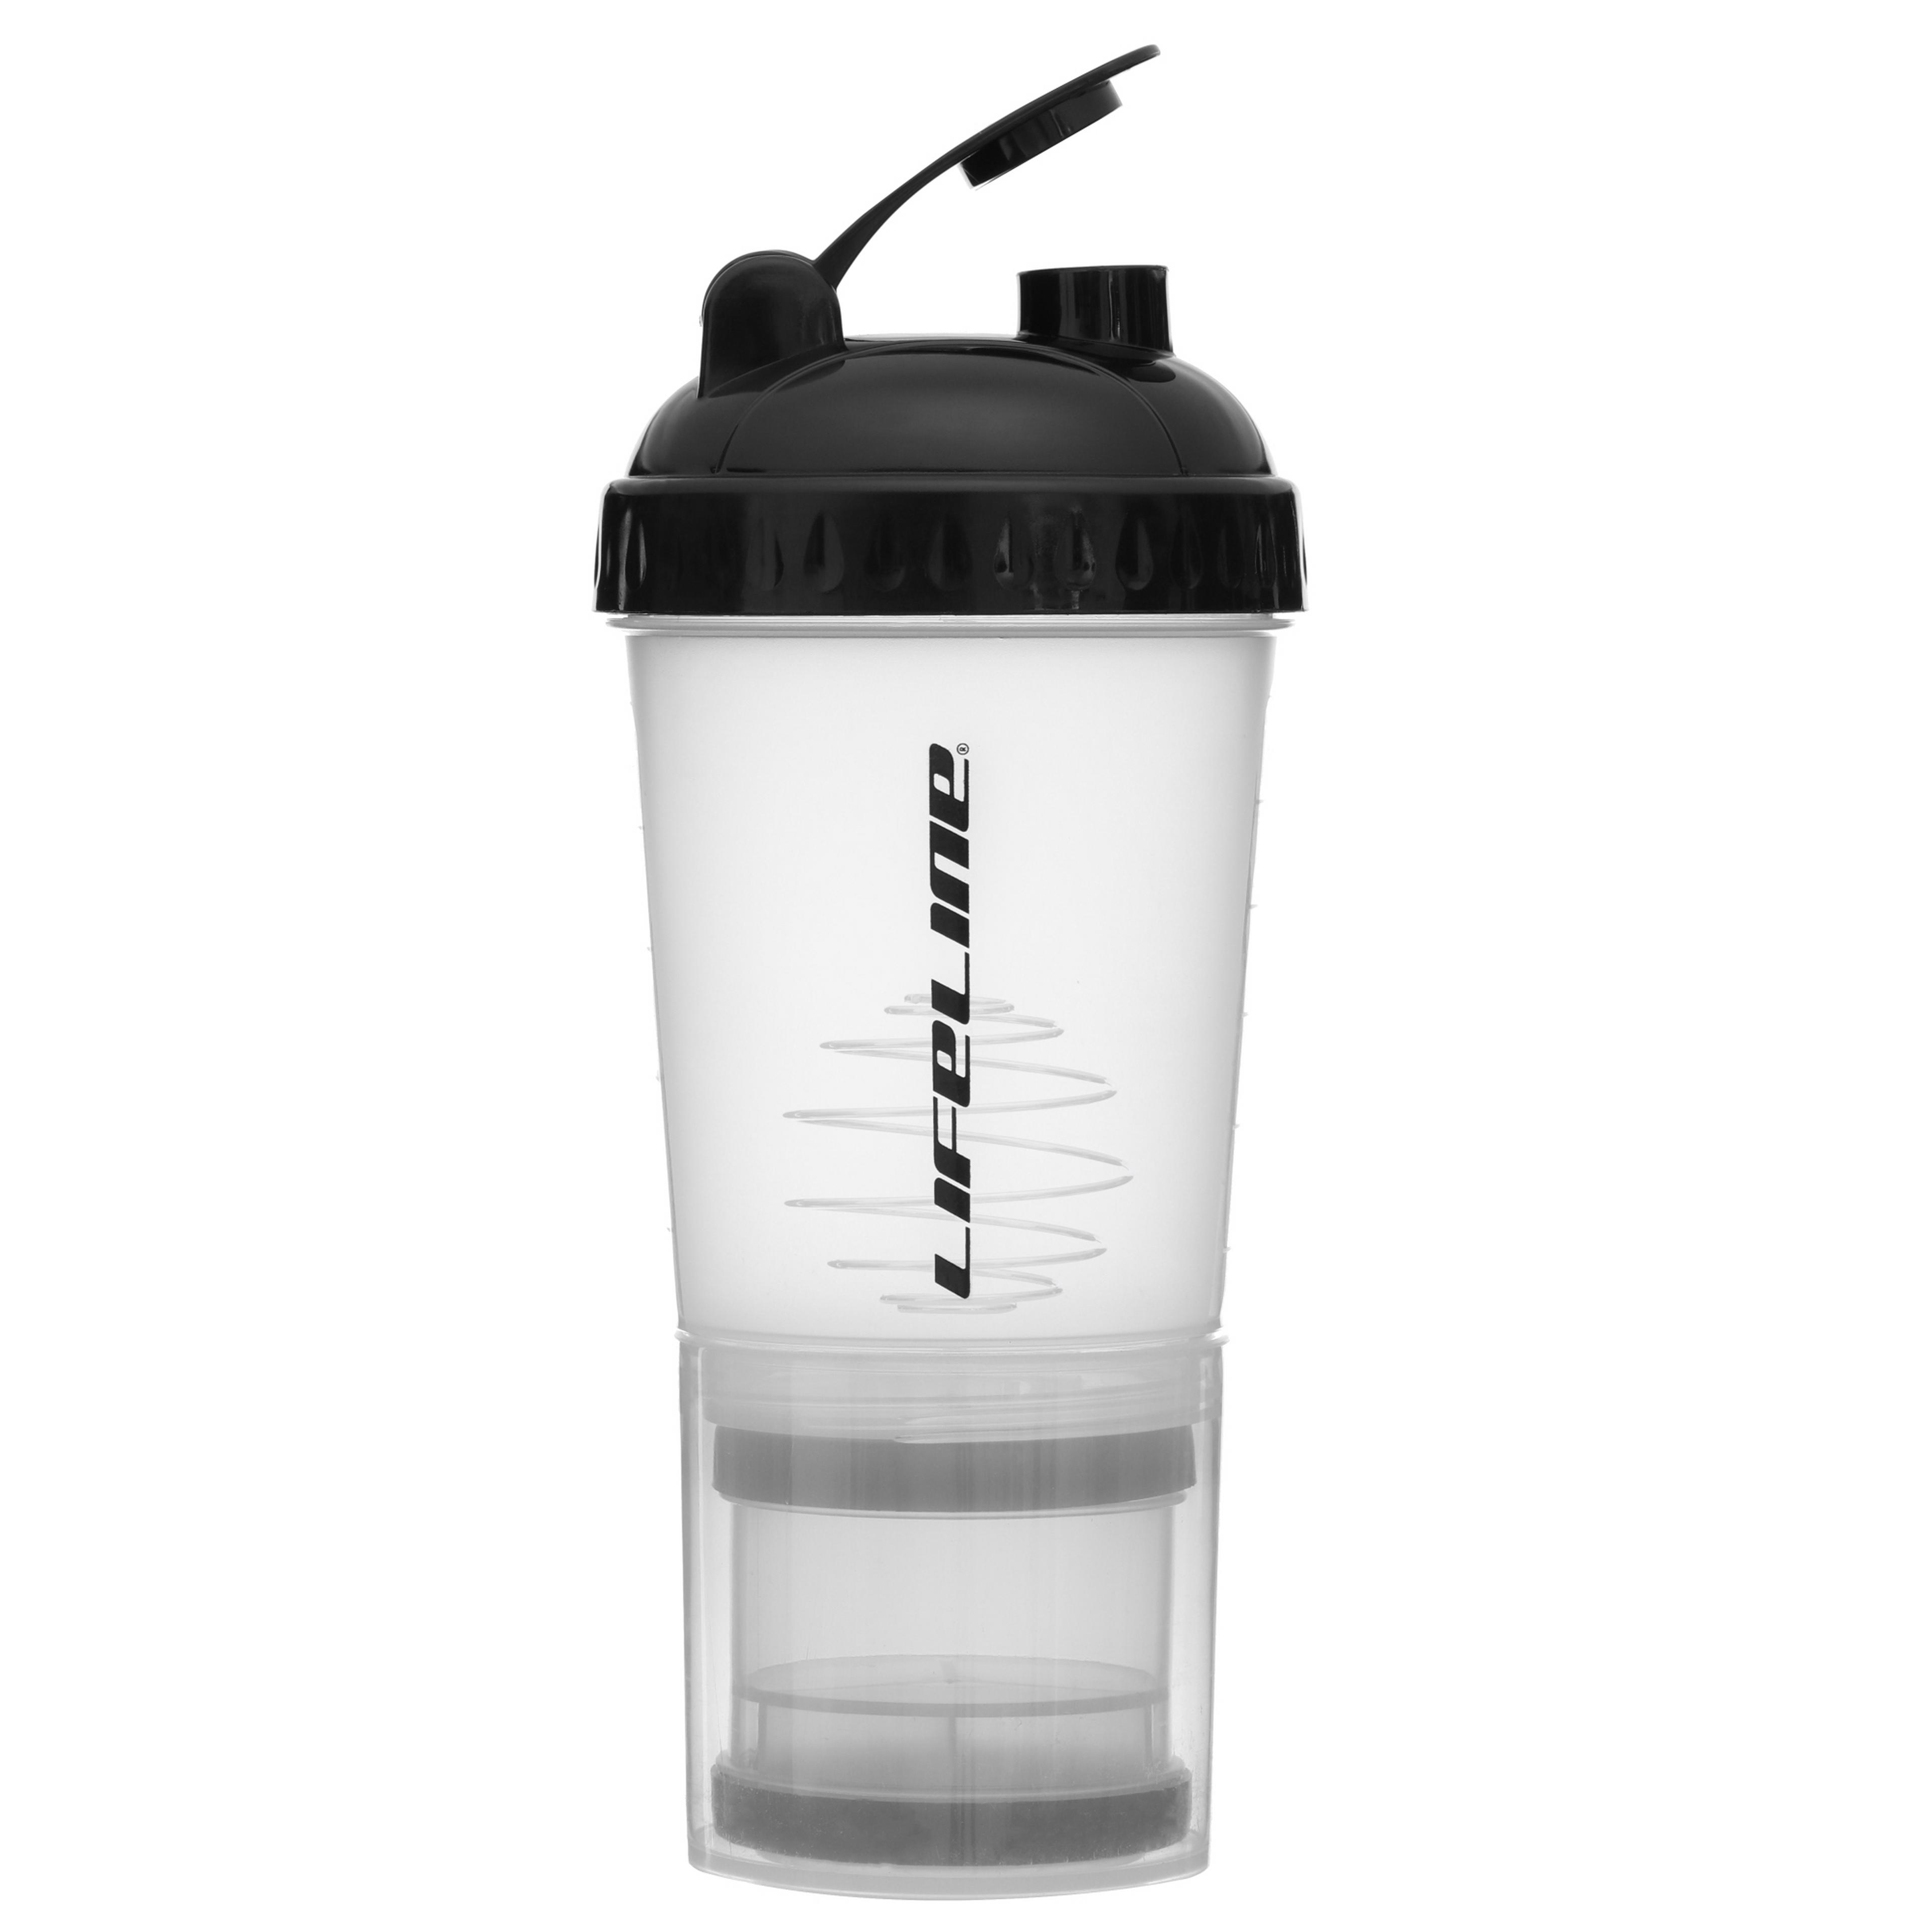 Protein Shaker Bottle 600ML Supplement Drink Shake Ball Gym Cup Mixing Mixer